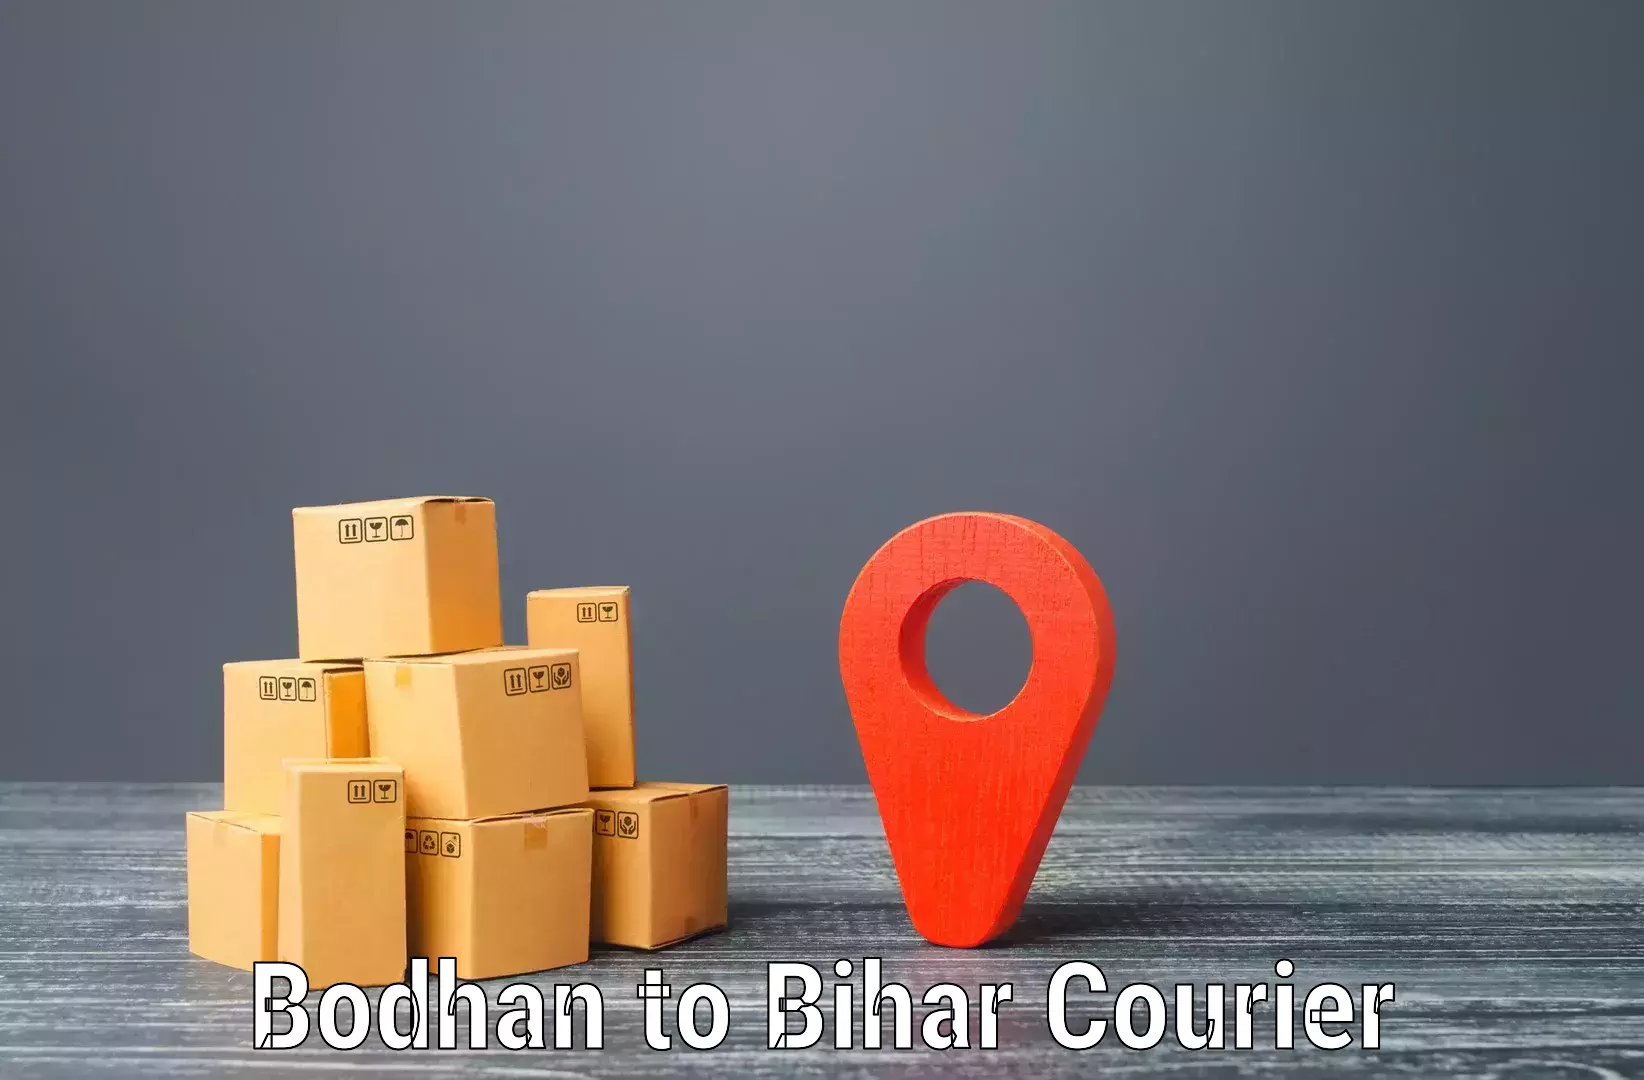 Customer-centric shipping Bodhan to West Champaran